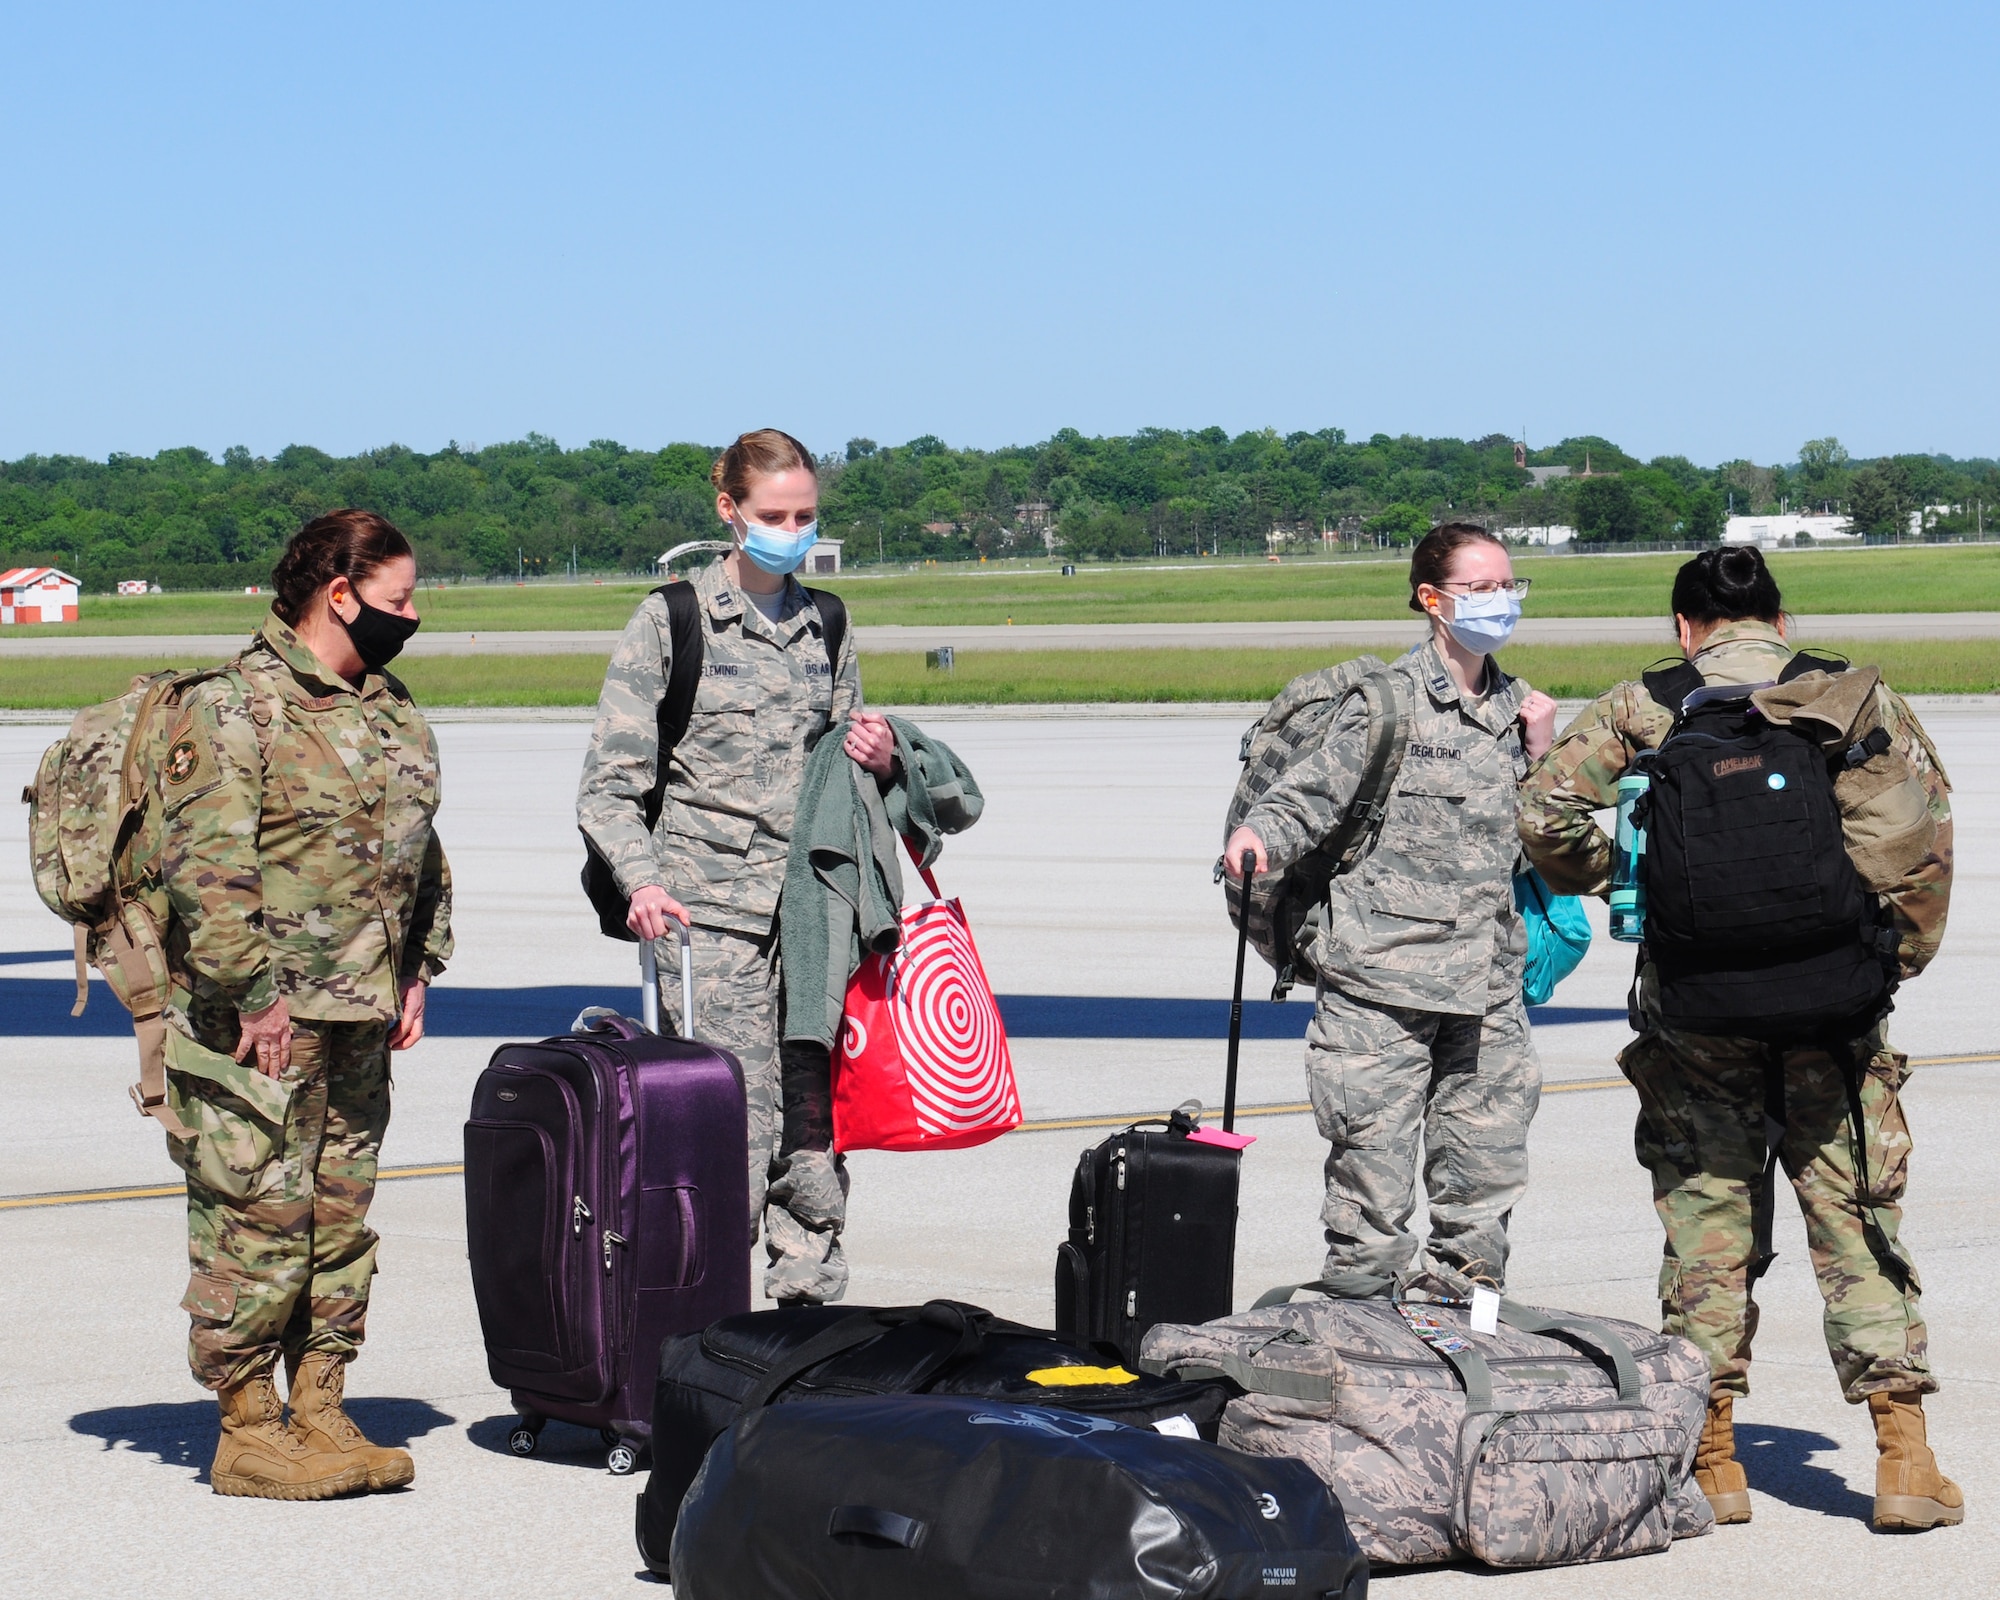 Airmen from the 445th Aeromedical Staging Squadron return home here May 31, 2020, after arriving on a 445th Airlift Wing C-17 Globemaster III. The medical reservists departed to serve on the front line of COVID-19 in New York City, New York in early April, 2020. The group partnered with civilian and military counterparts to support the Lincoln Medical Center in The Bronx, New York during the pandemic. (U.S. Air Force photo/Airman 1st Class Erin Zimpfer)